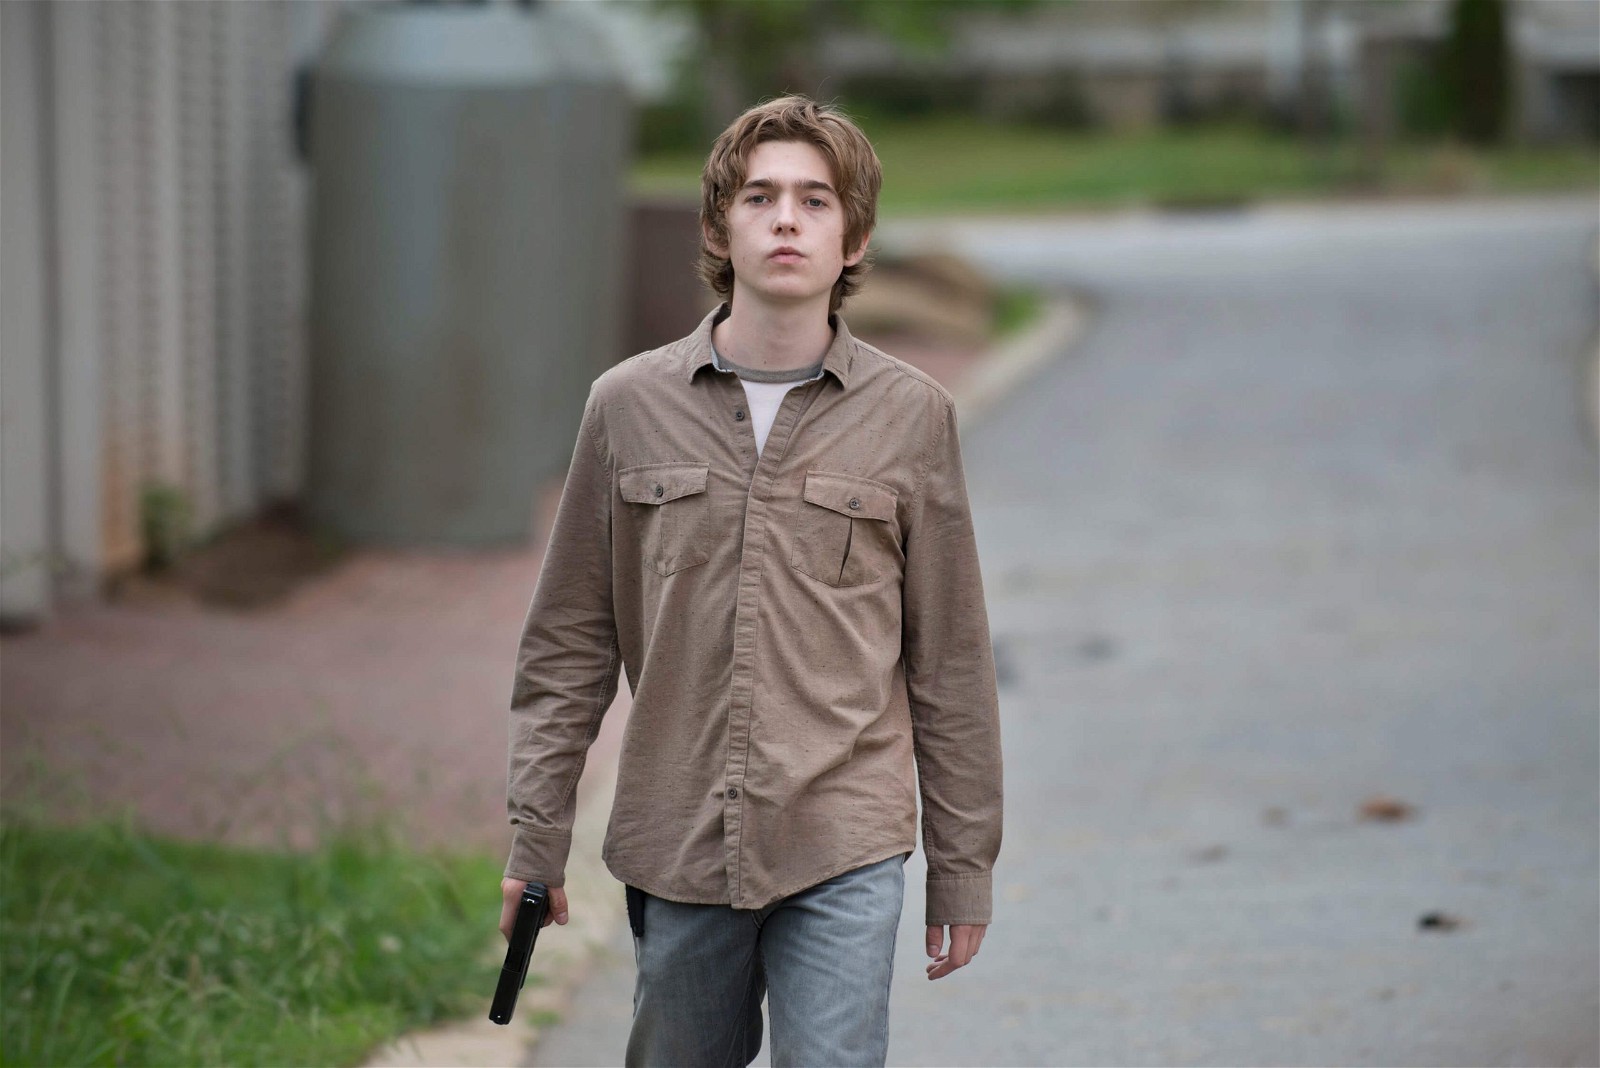 Austin Abrams as Ron Anderson in The Walking Dead